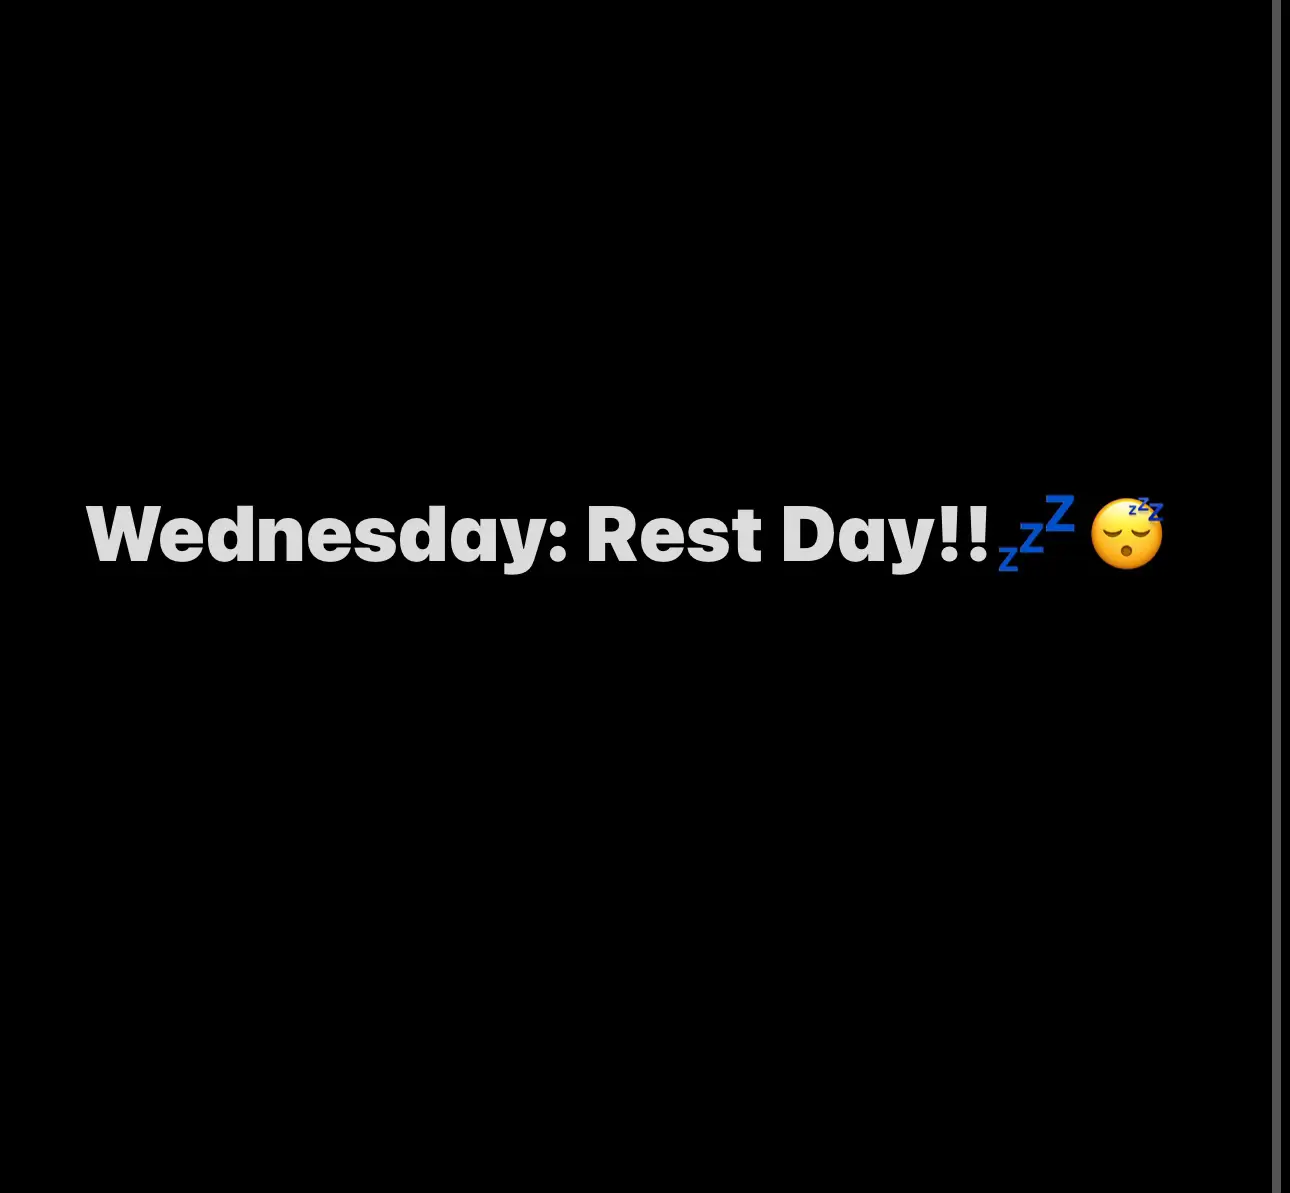 Echt - No Days Off 💪 is Friday a rest day or training day for you